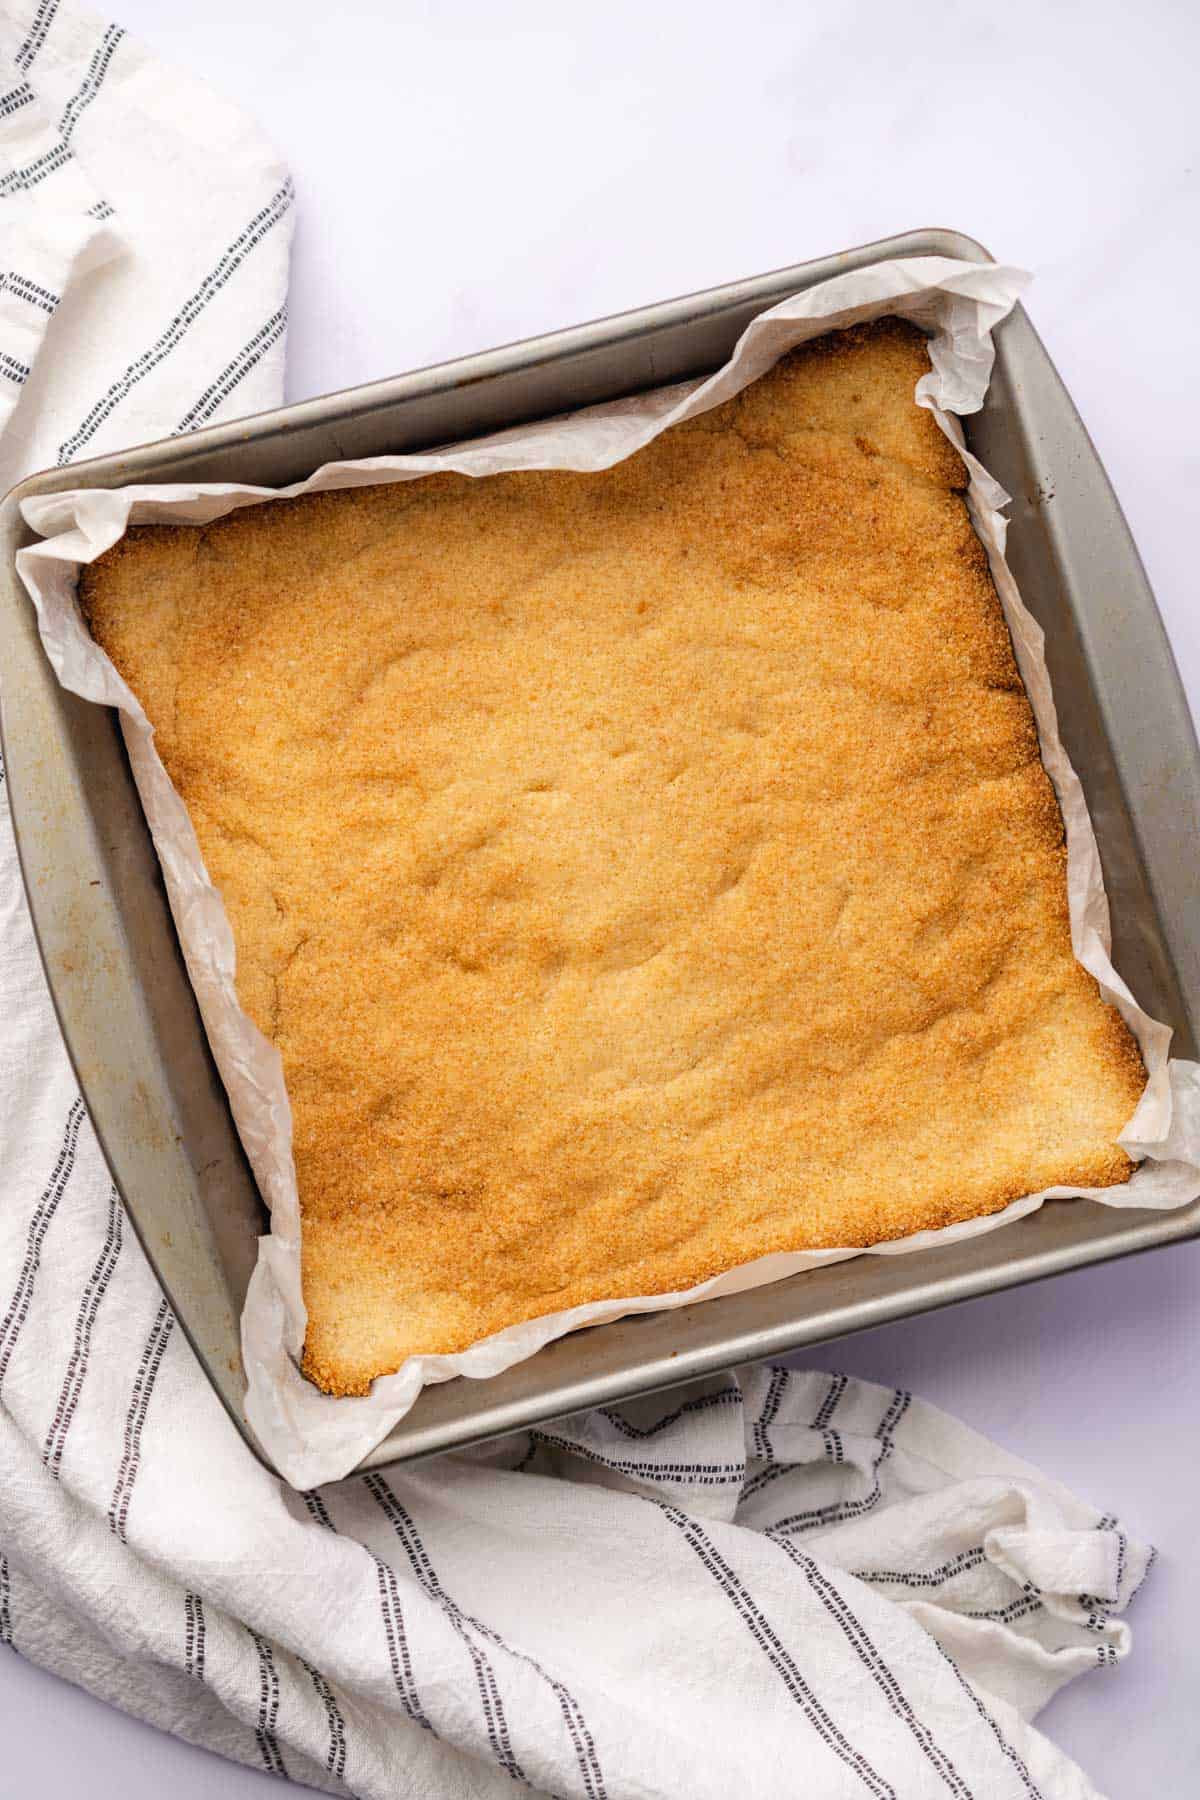 baked gluten free almond flour shortbread crust in a 9x9 pan with white parchment paper 